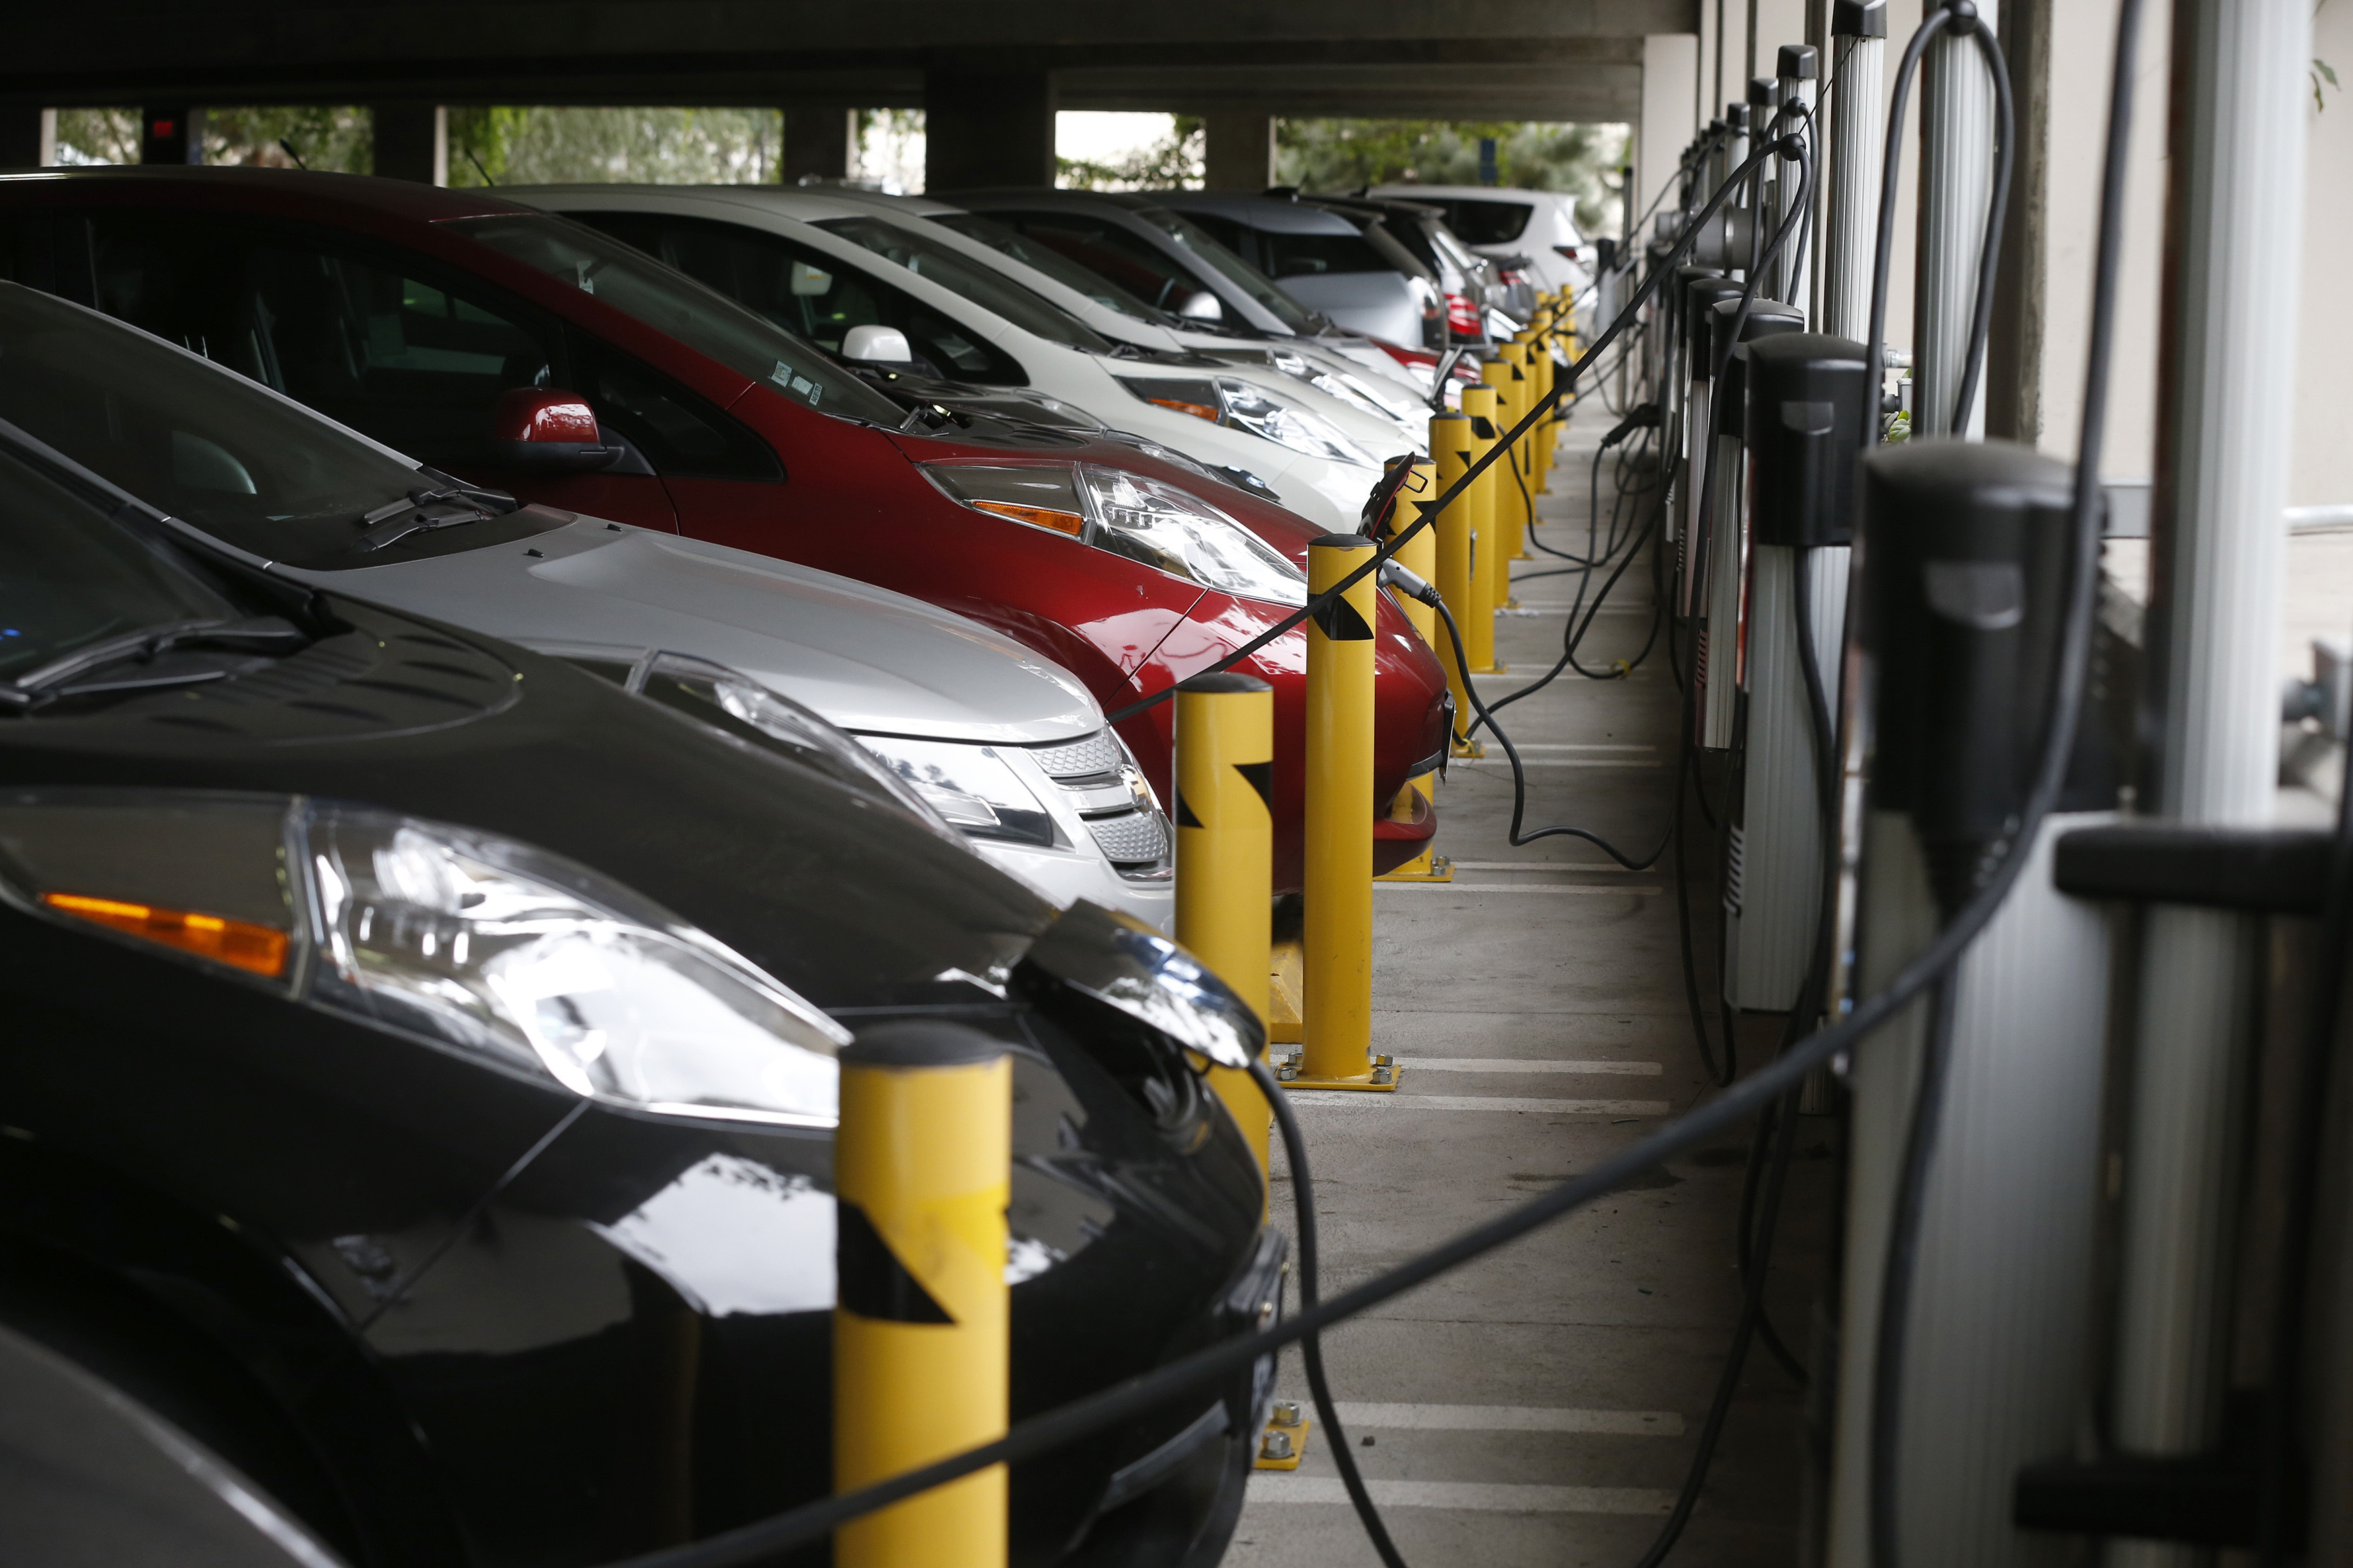 Electric cars sit charging in a parking garage at the University of California, Irvine